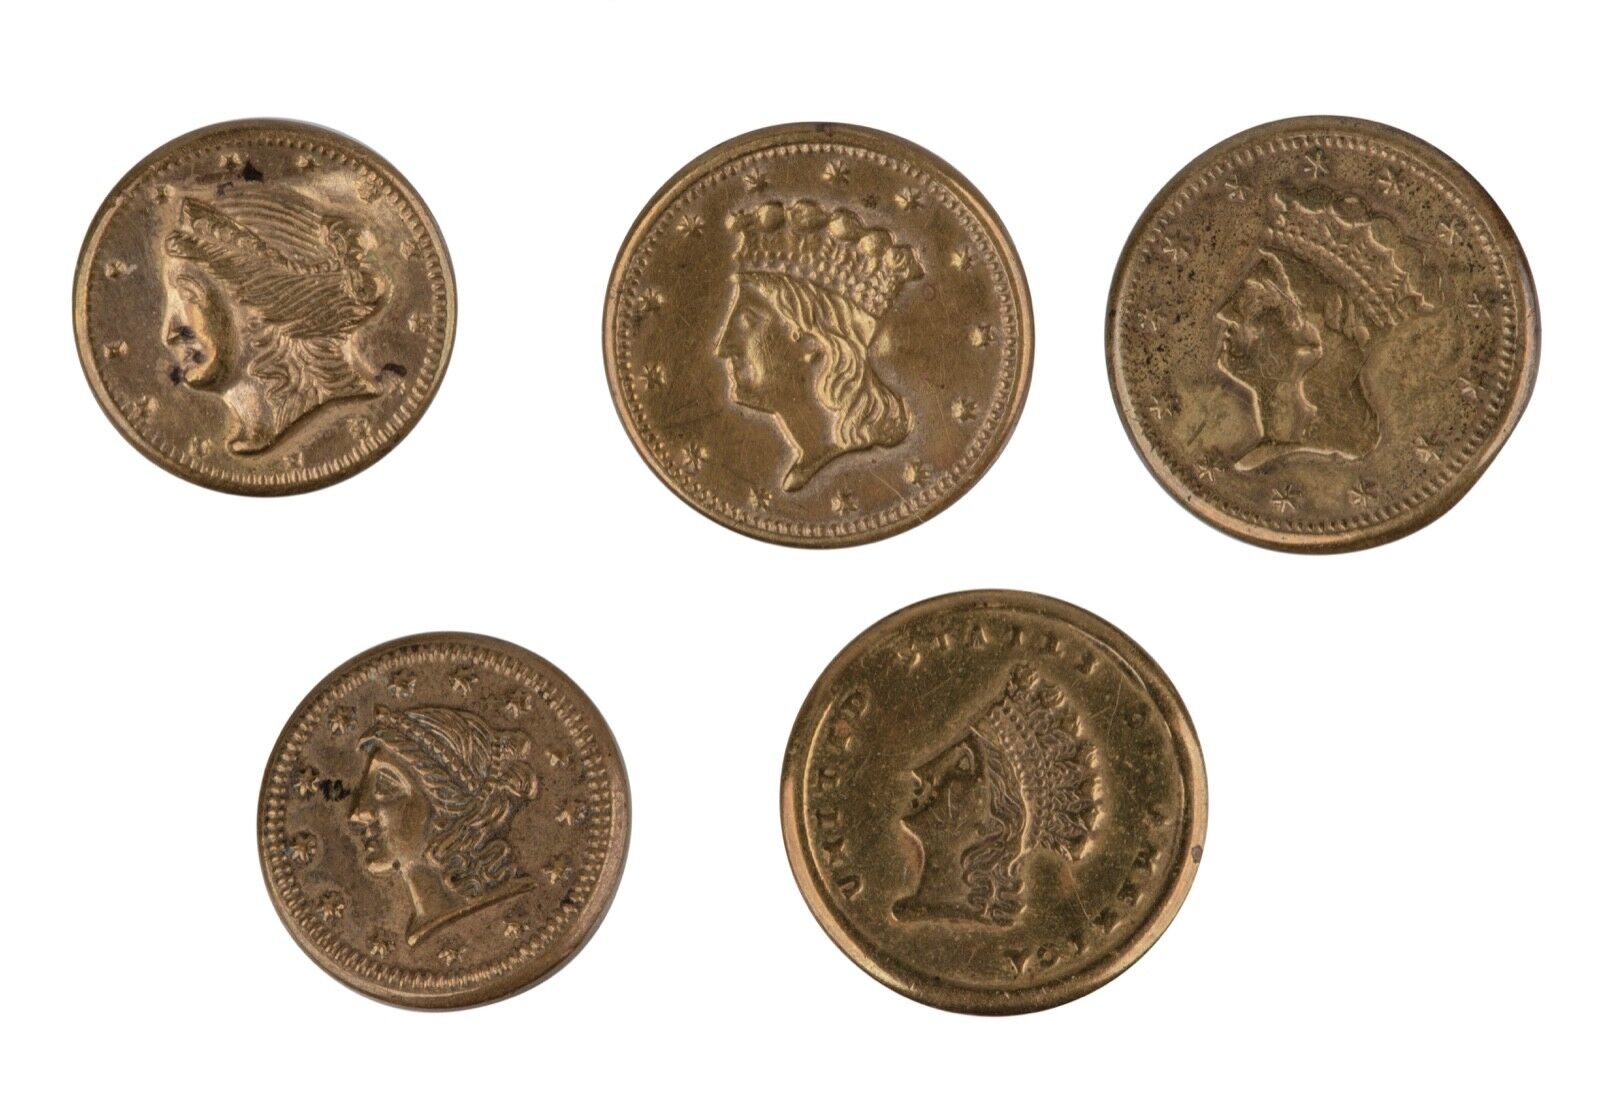 A Set Of Early American Coin Theme Buttons